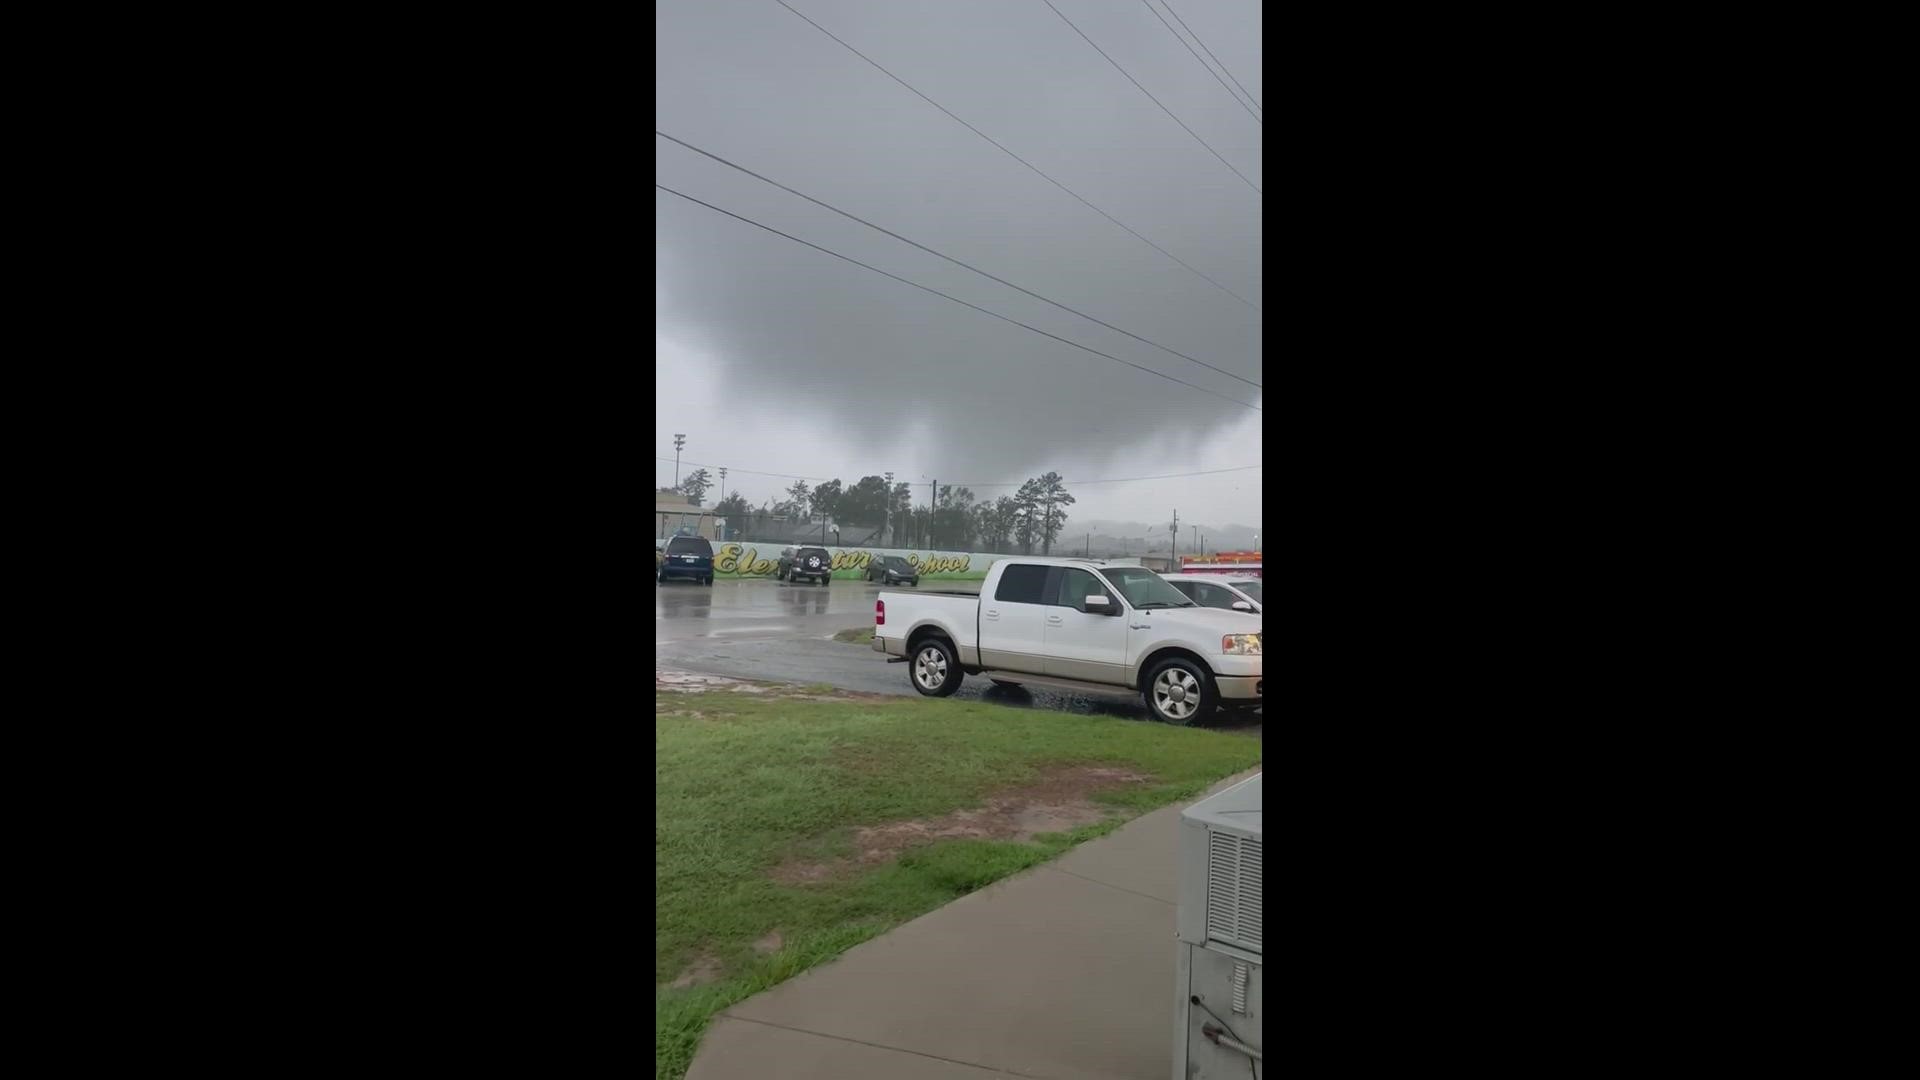 CBS19 viewer Garland Harroff caught footage of the tornado touching down in Winona on Aug. 22